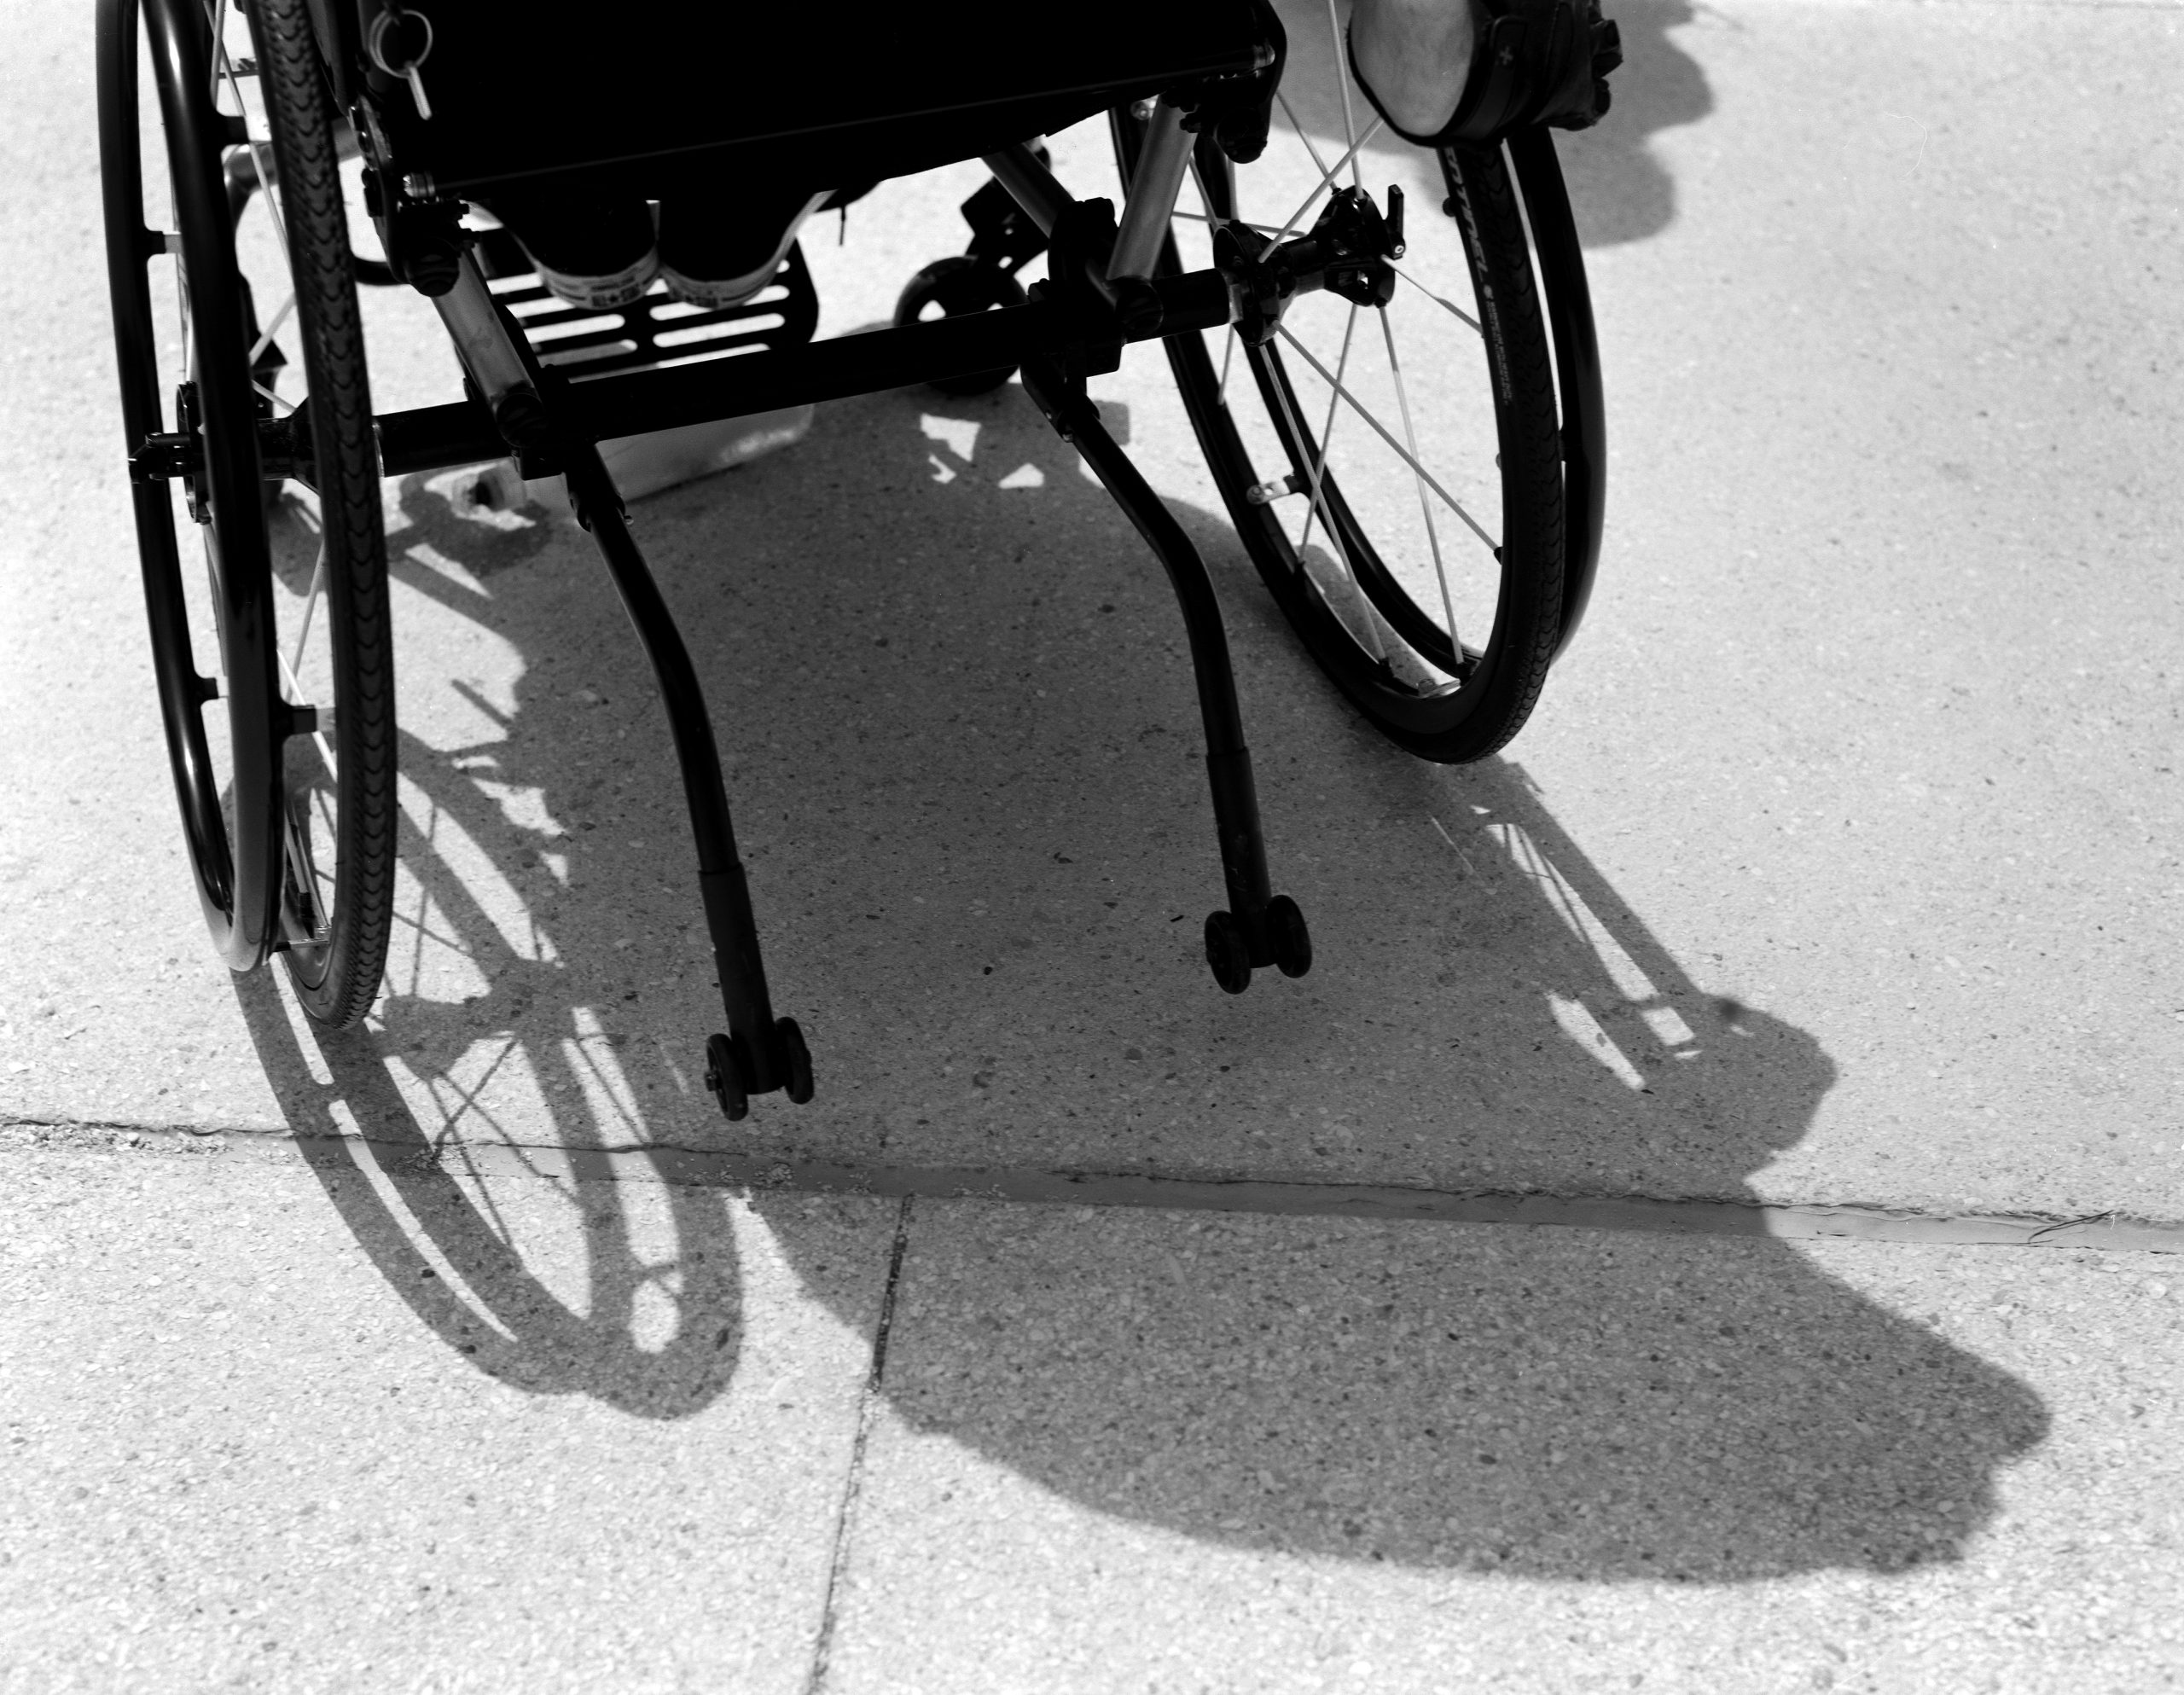 Detail of a wheelchair with shadow. Captured on film